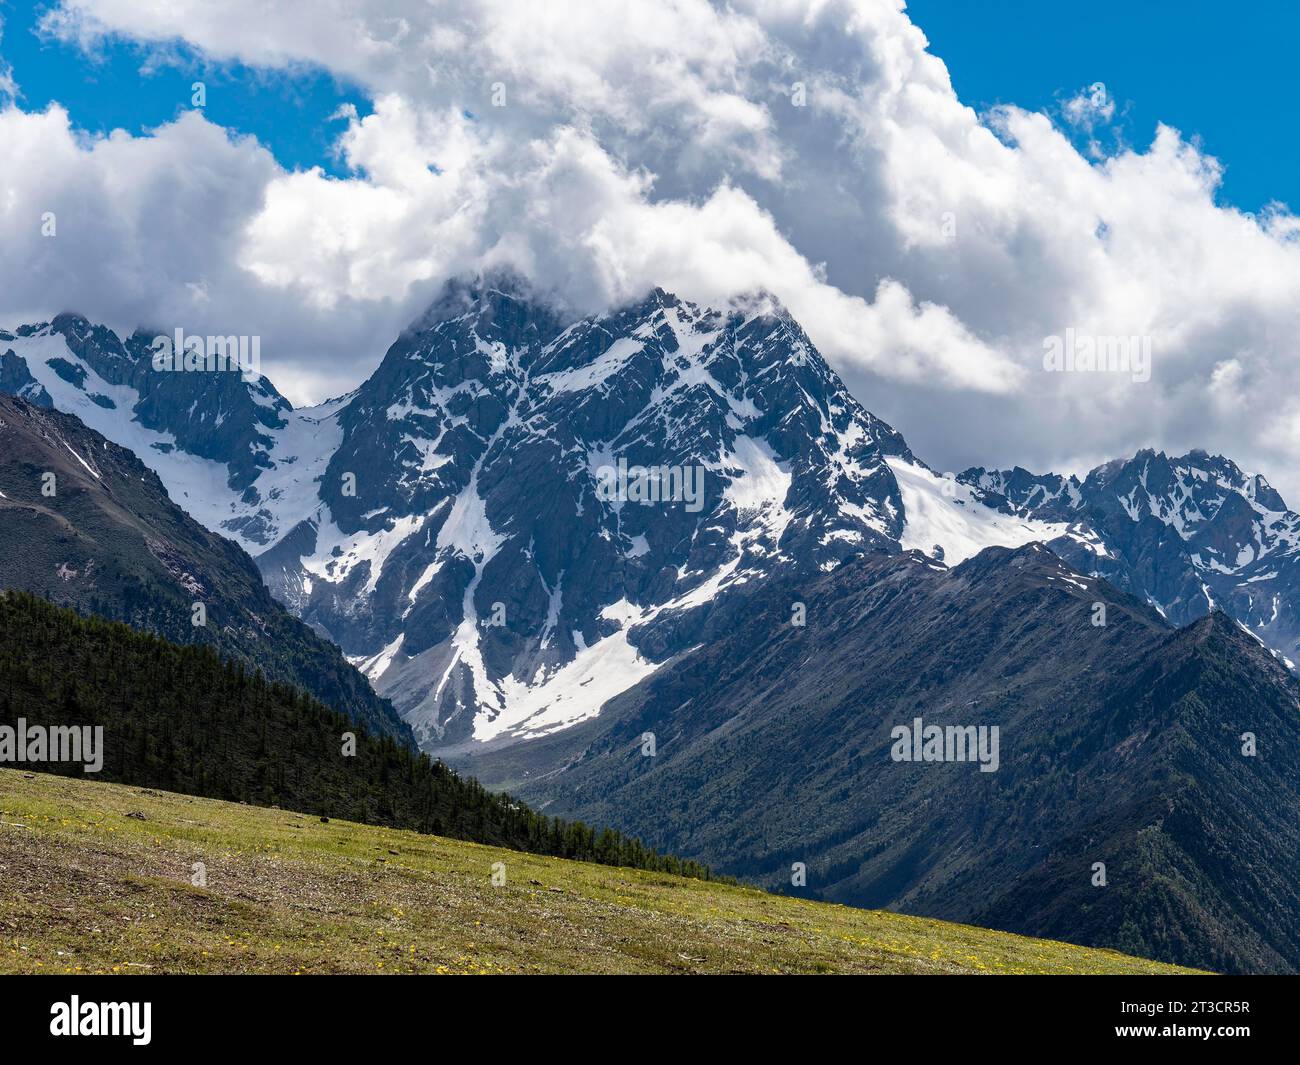 Mountain ranges with snow and meadows with yellow flowers in the highlands of eastern Tibet, China Stock Photo